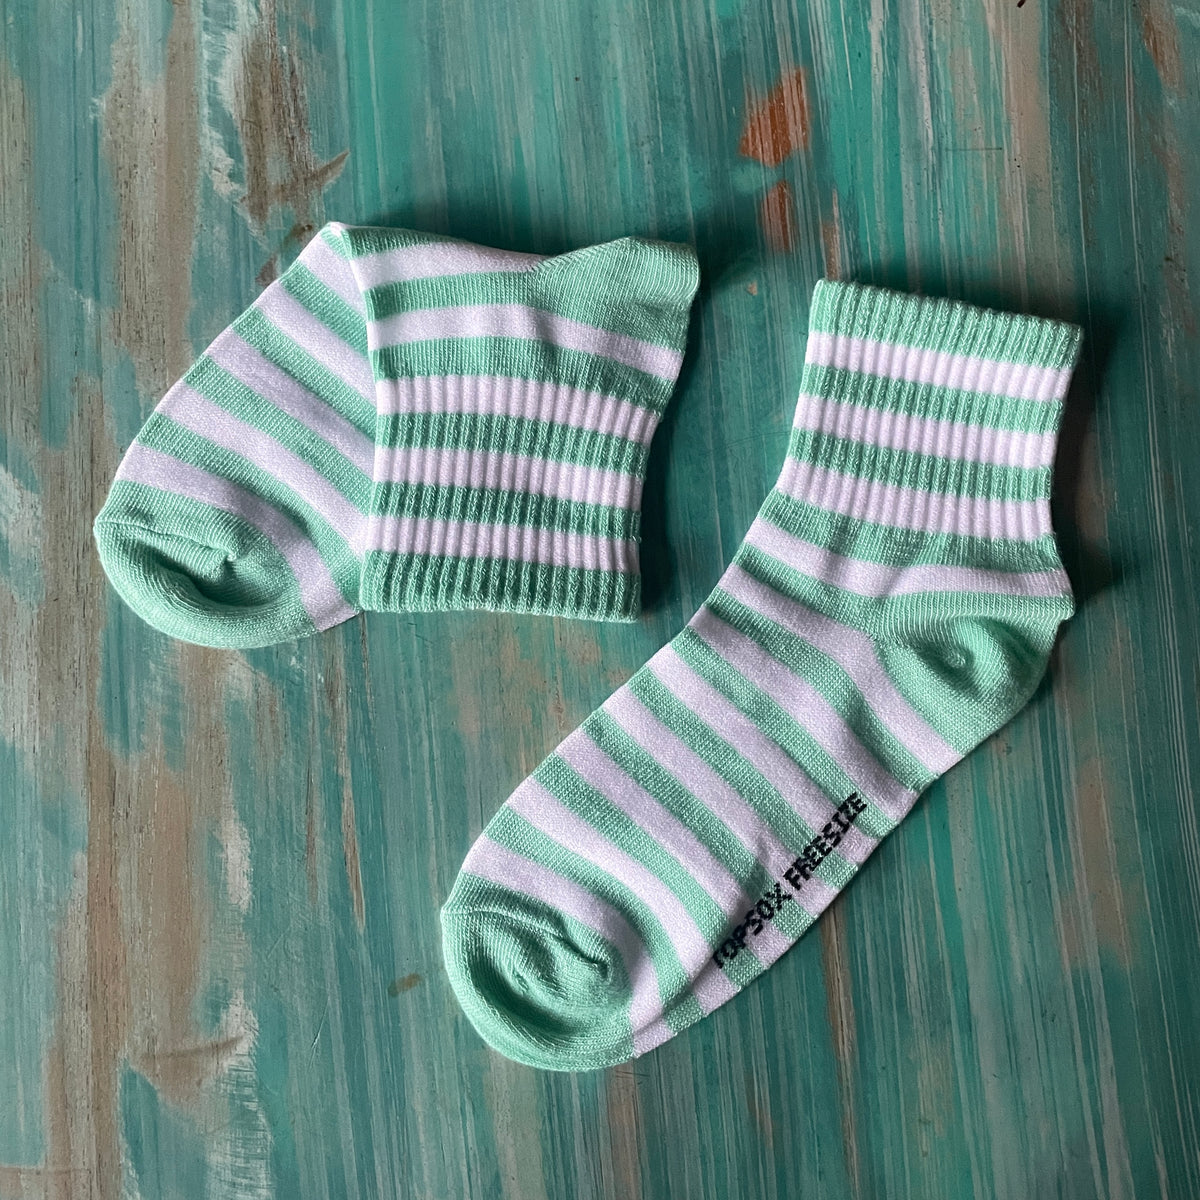 Anklets - Mint/White striped